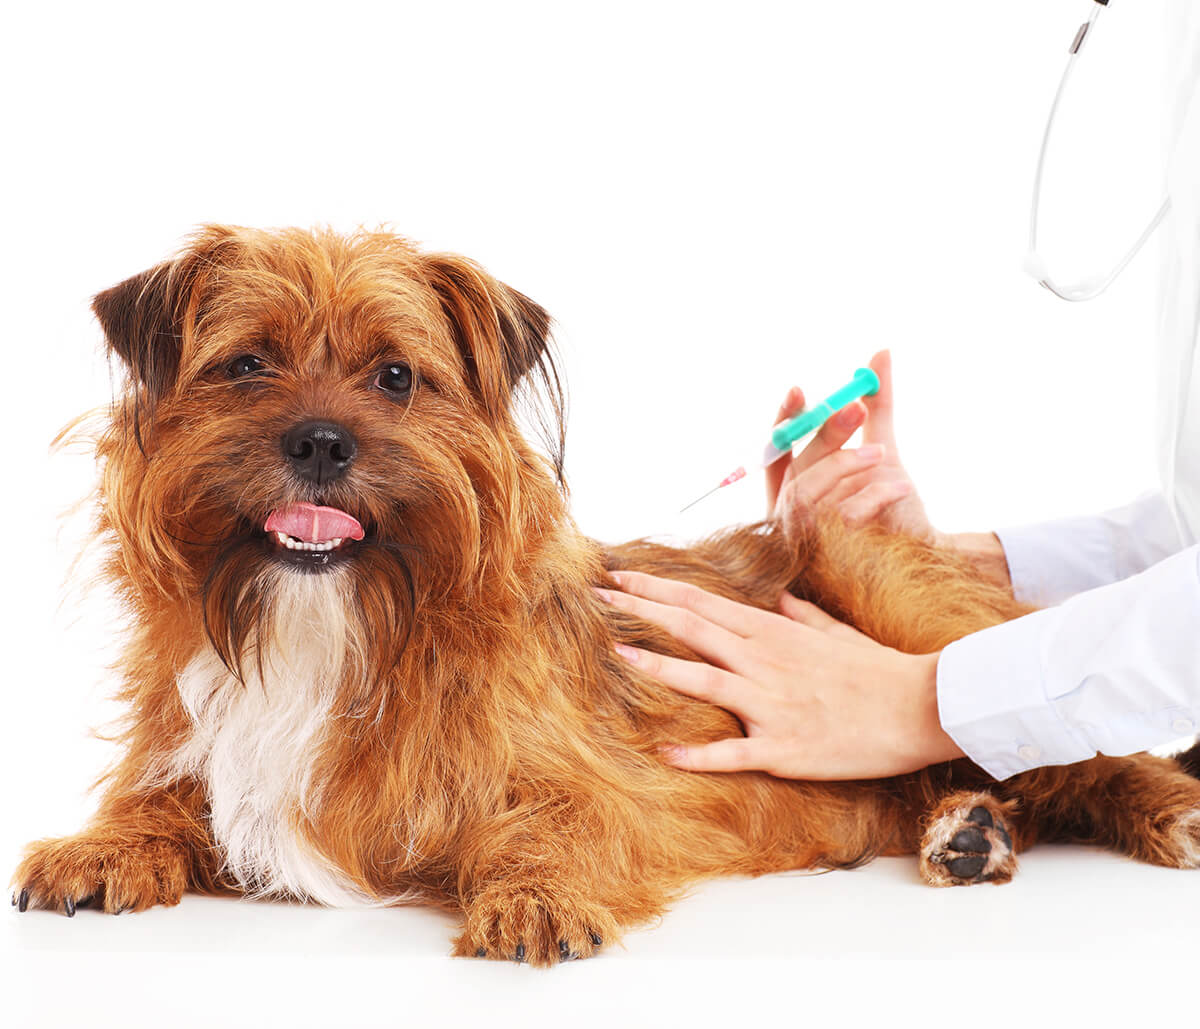 Vaccinations to keep your animal healthy explained by Jacksonville, Florida vet